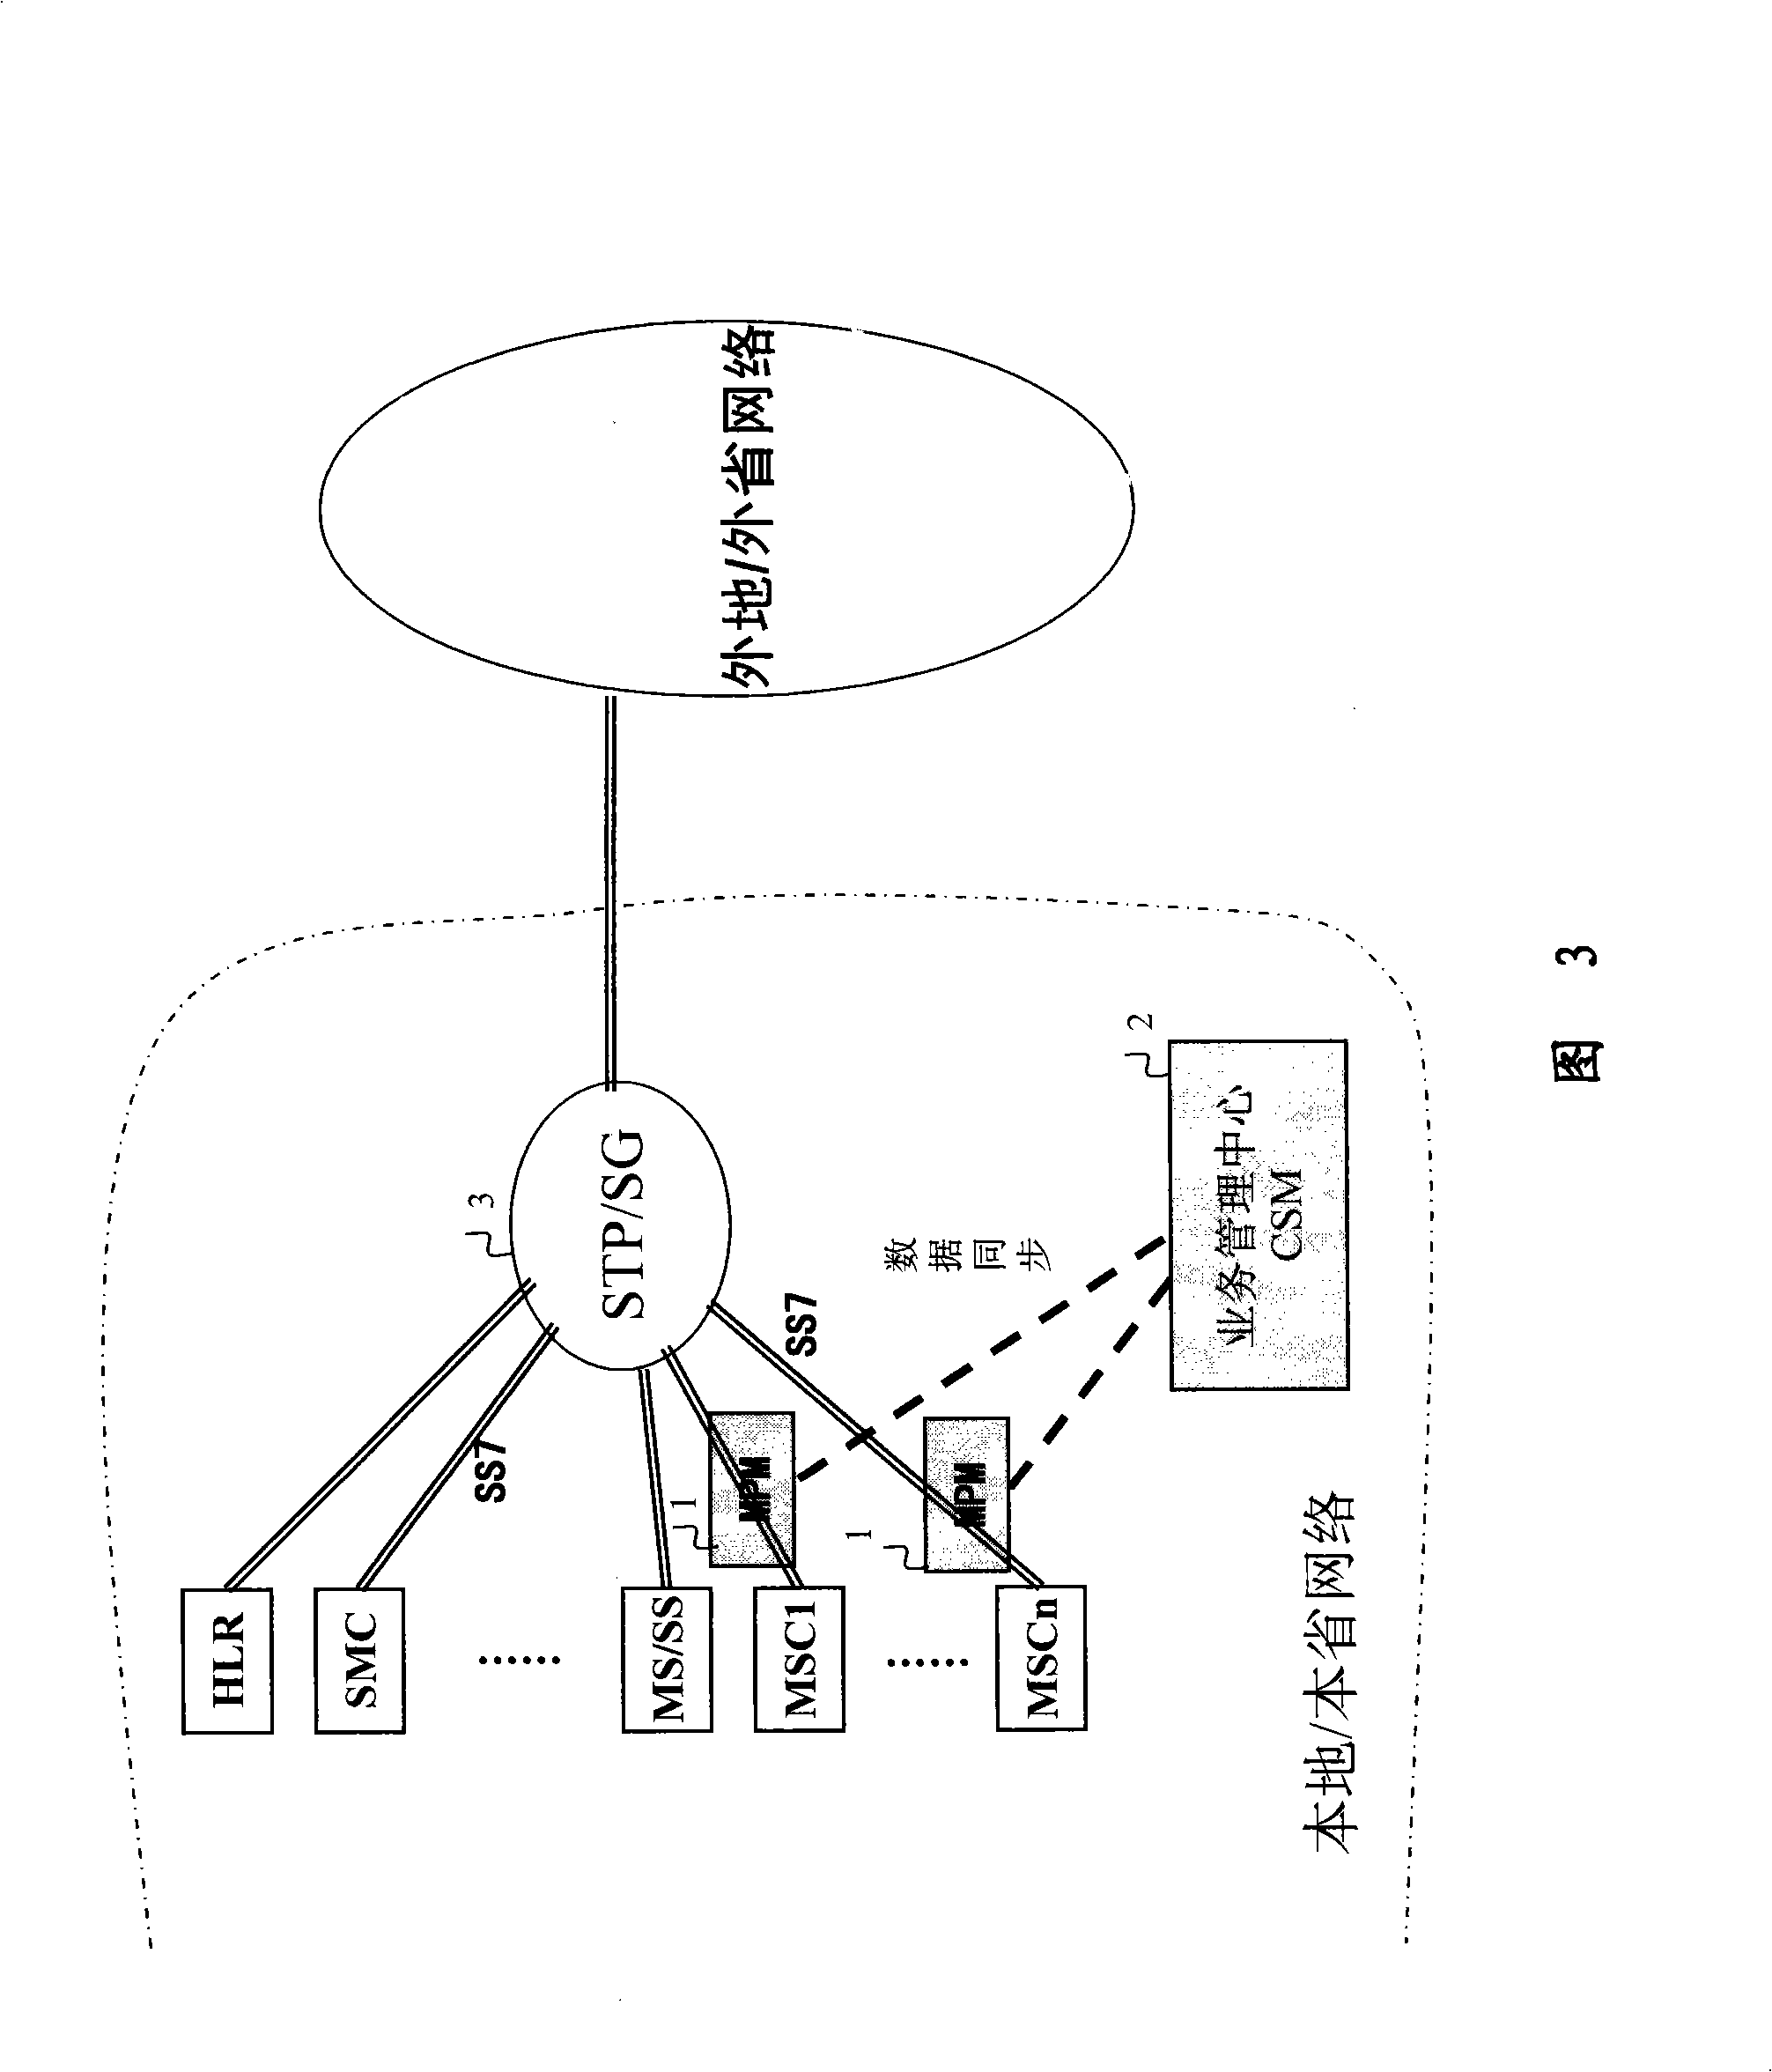 System and method for detecting and limiting line resource occupation by calling back